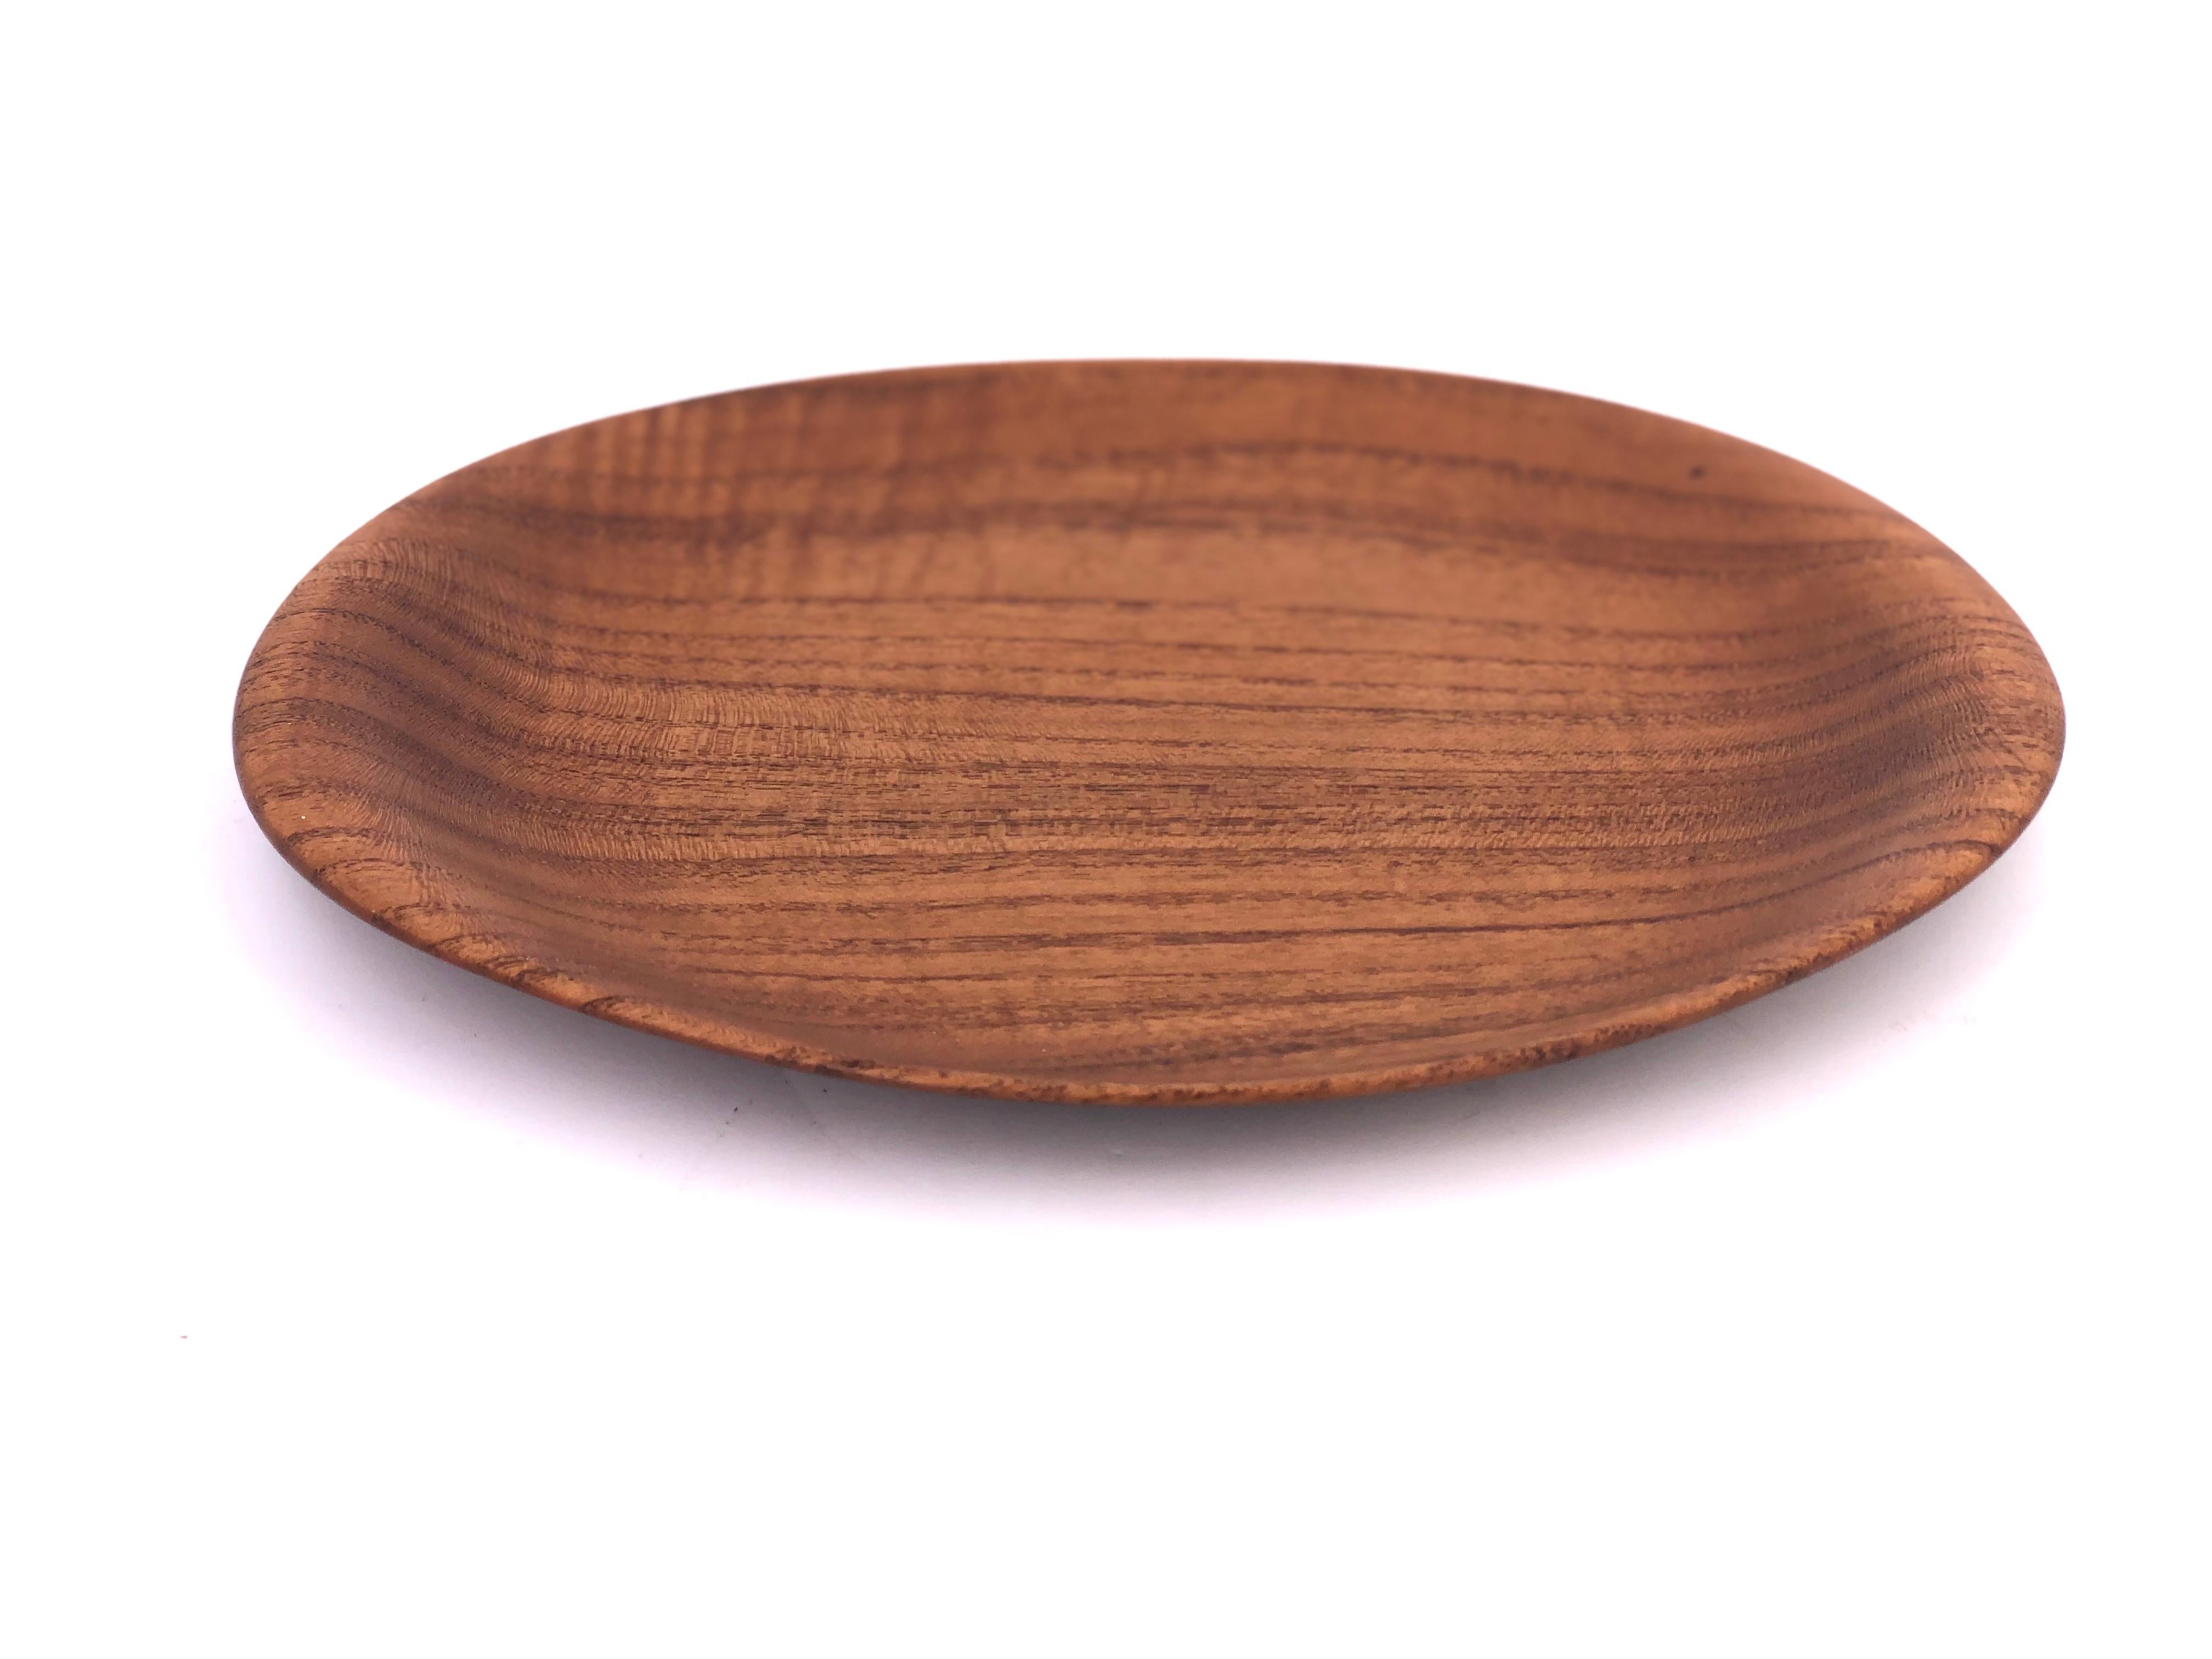 A beautiful solid teak handmade serving tray, beautiful grain, and condition oval shape, with raised edges unmarked in the style of Kay Bojensen.